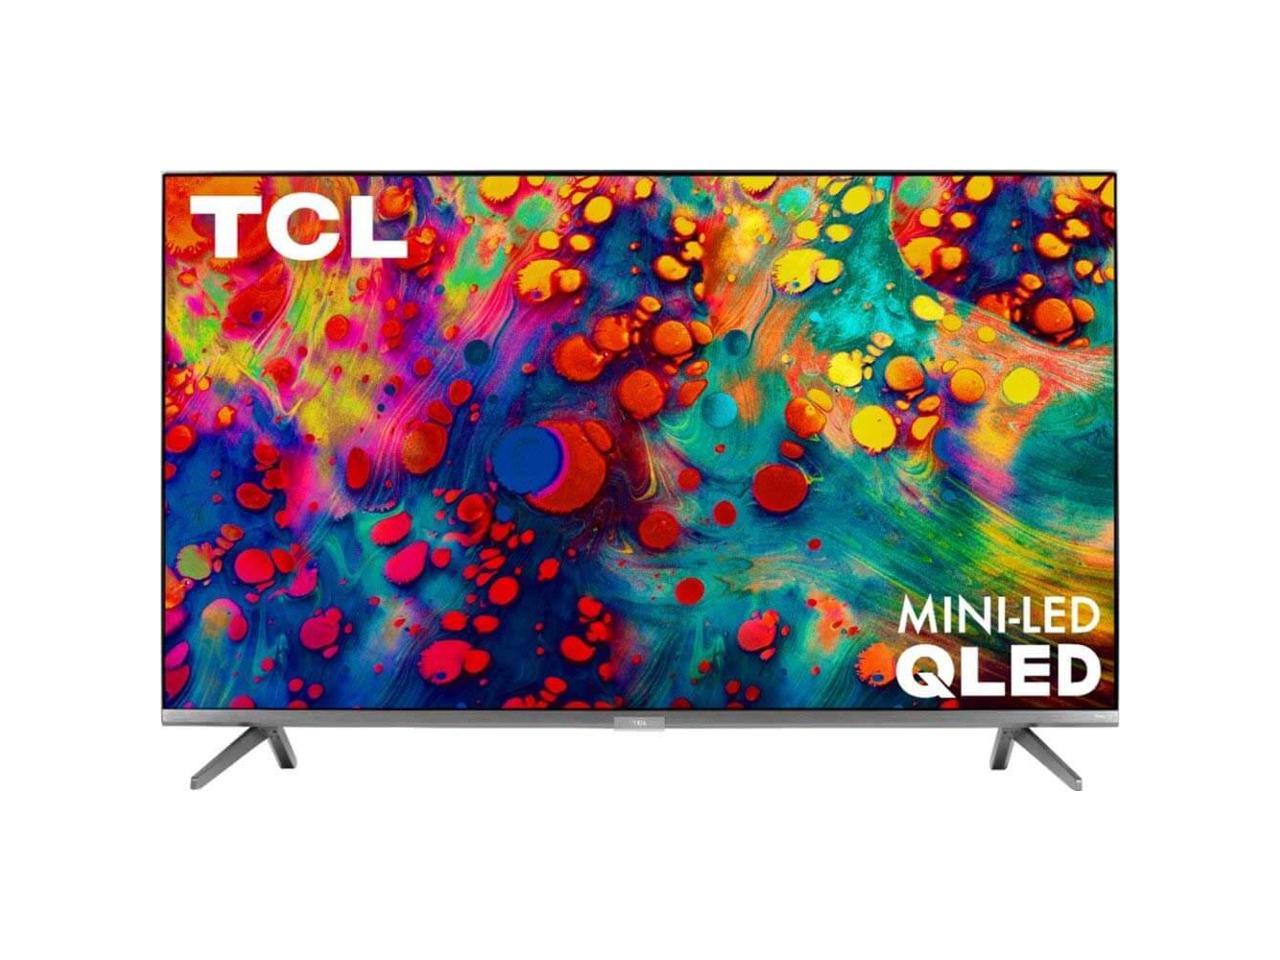 TCL 65" Class 6-Series 4K UHD Mini-LED QLED Dolby Vision HDR Roku Smart TV – 65R635 - image 1 of 16